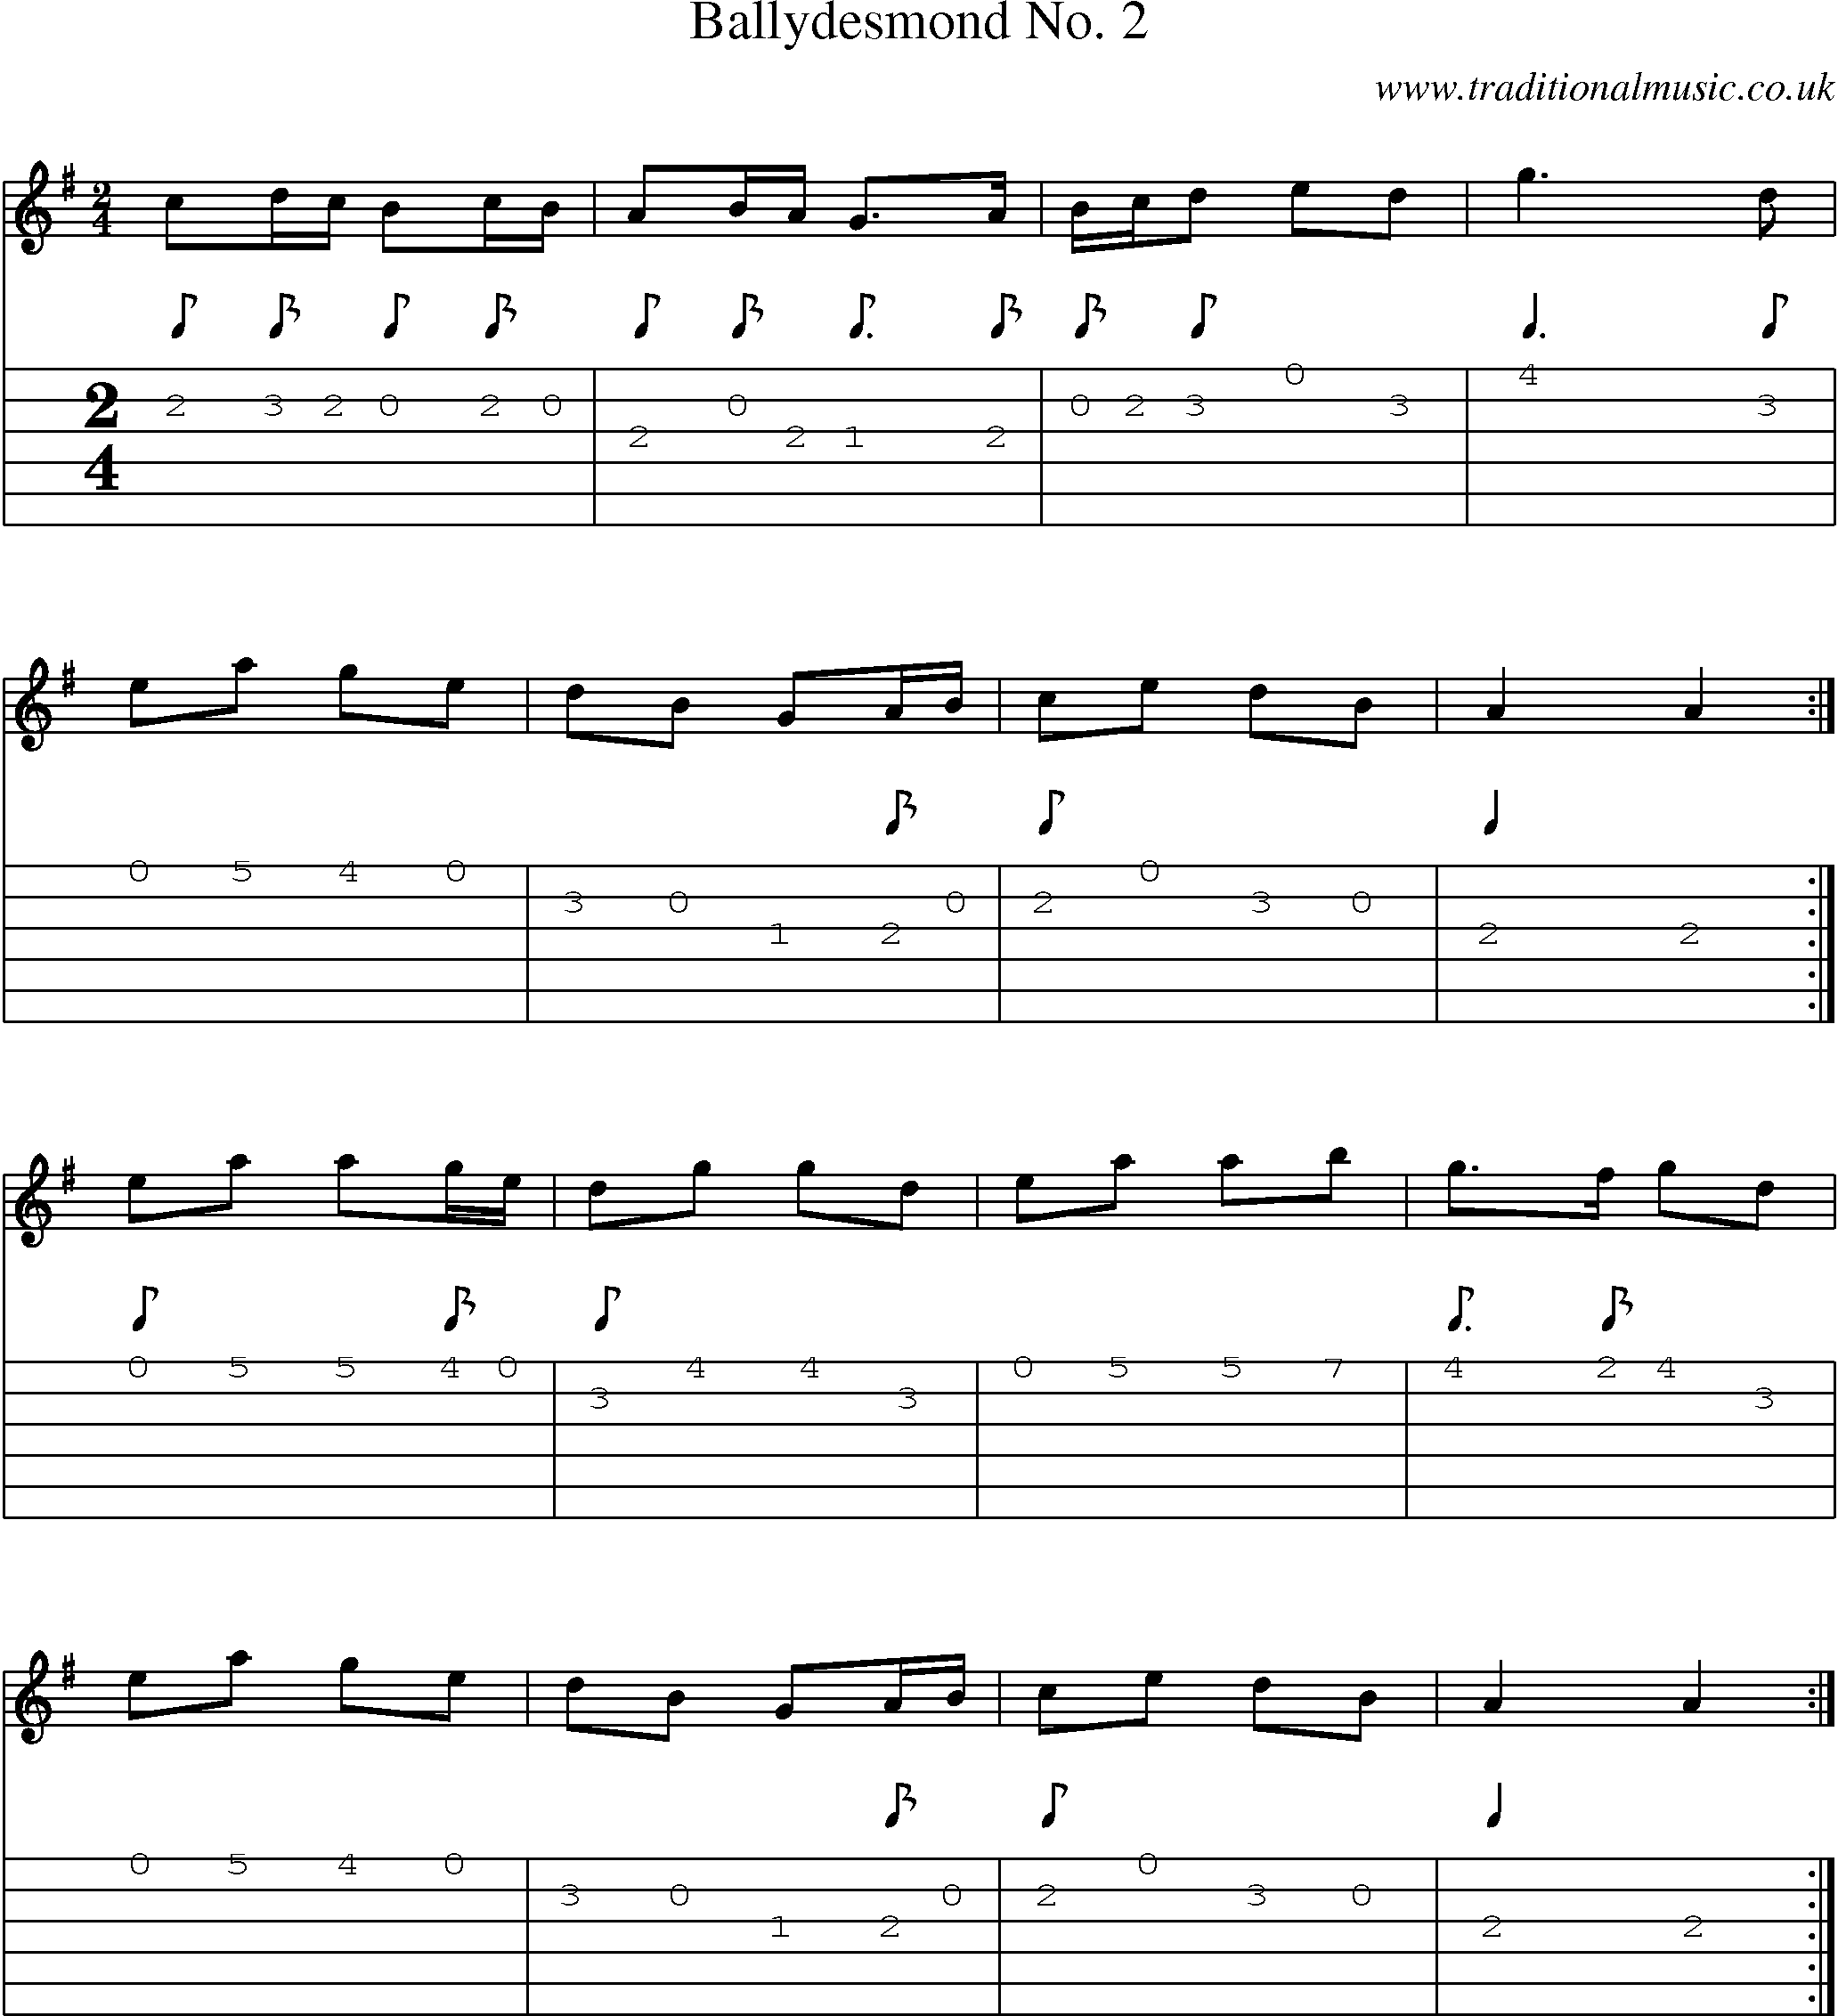 Music Score and Guitar Tabs for Ballydesmond No 2